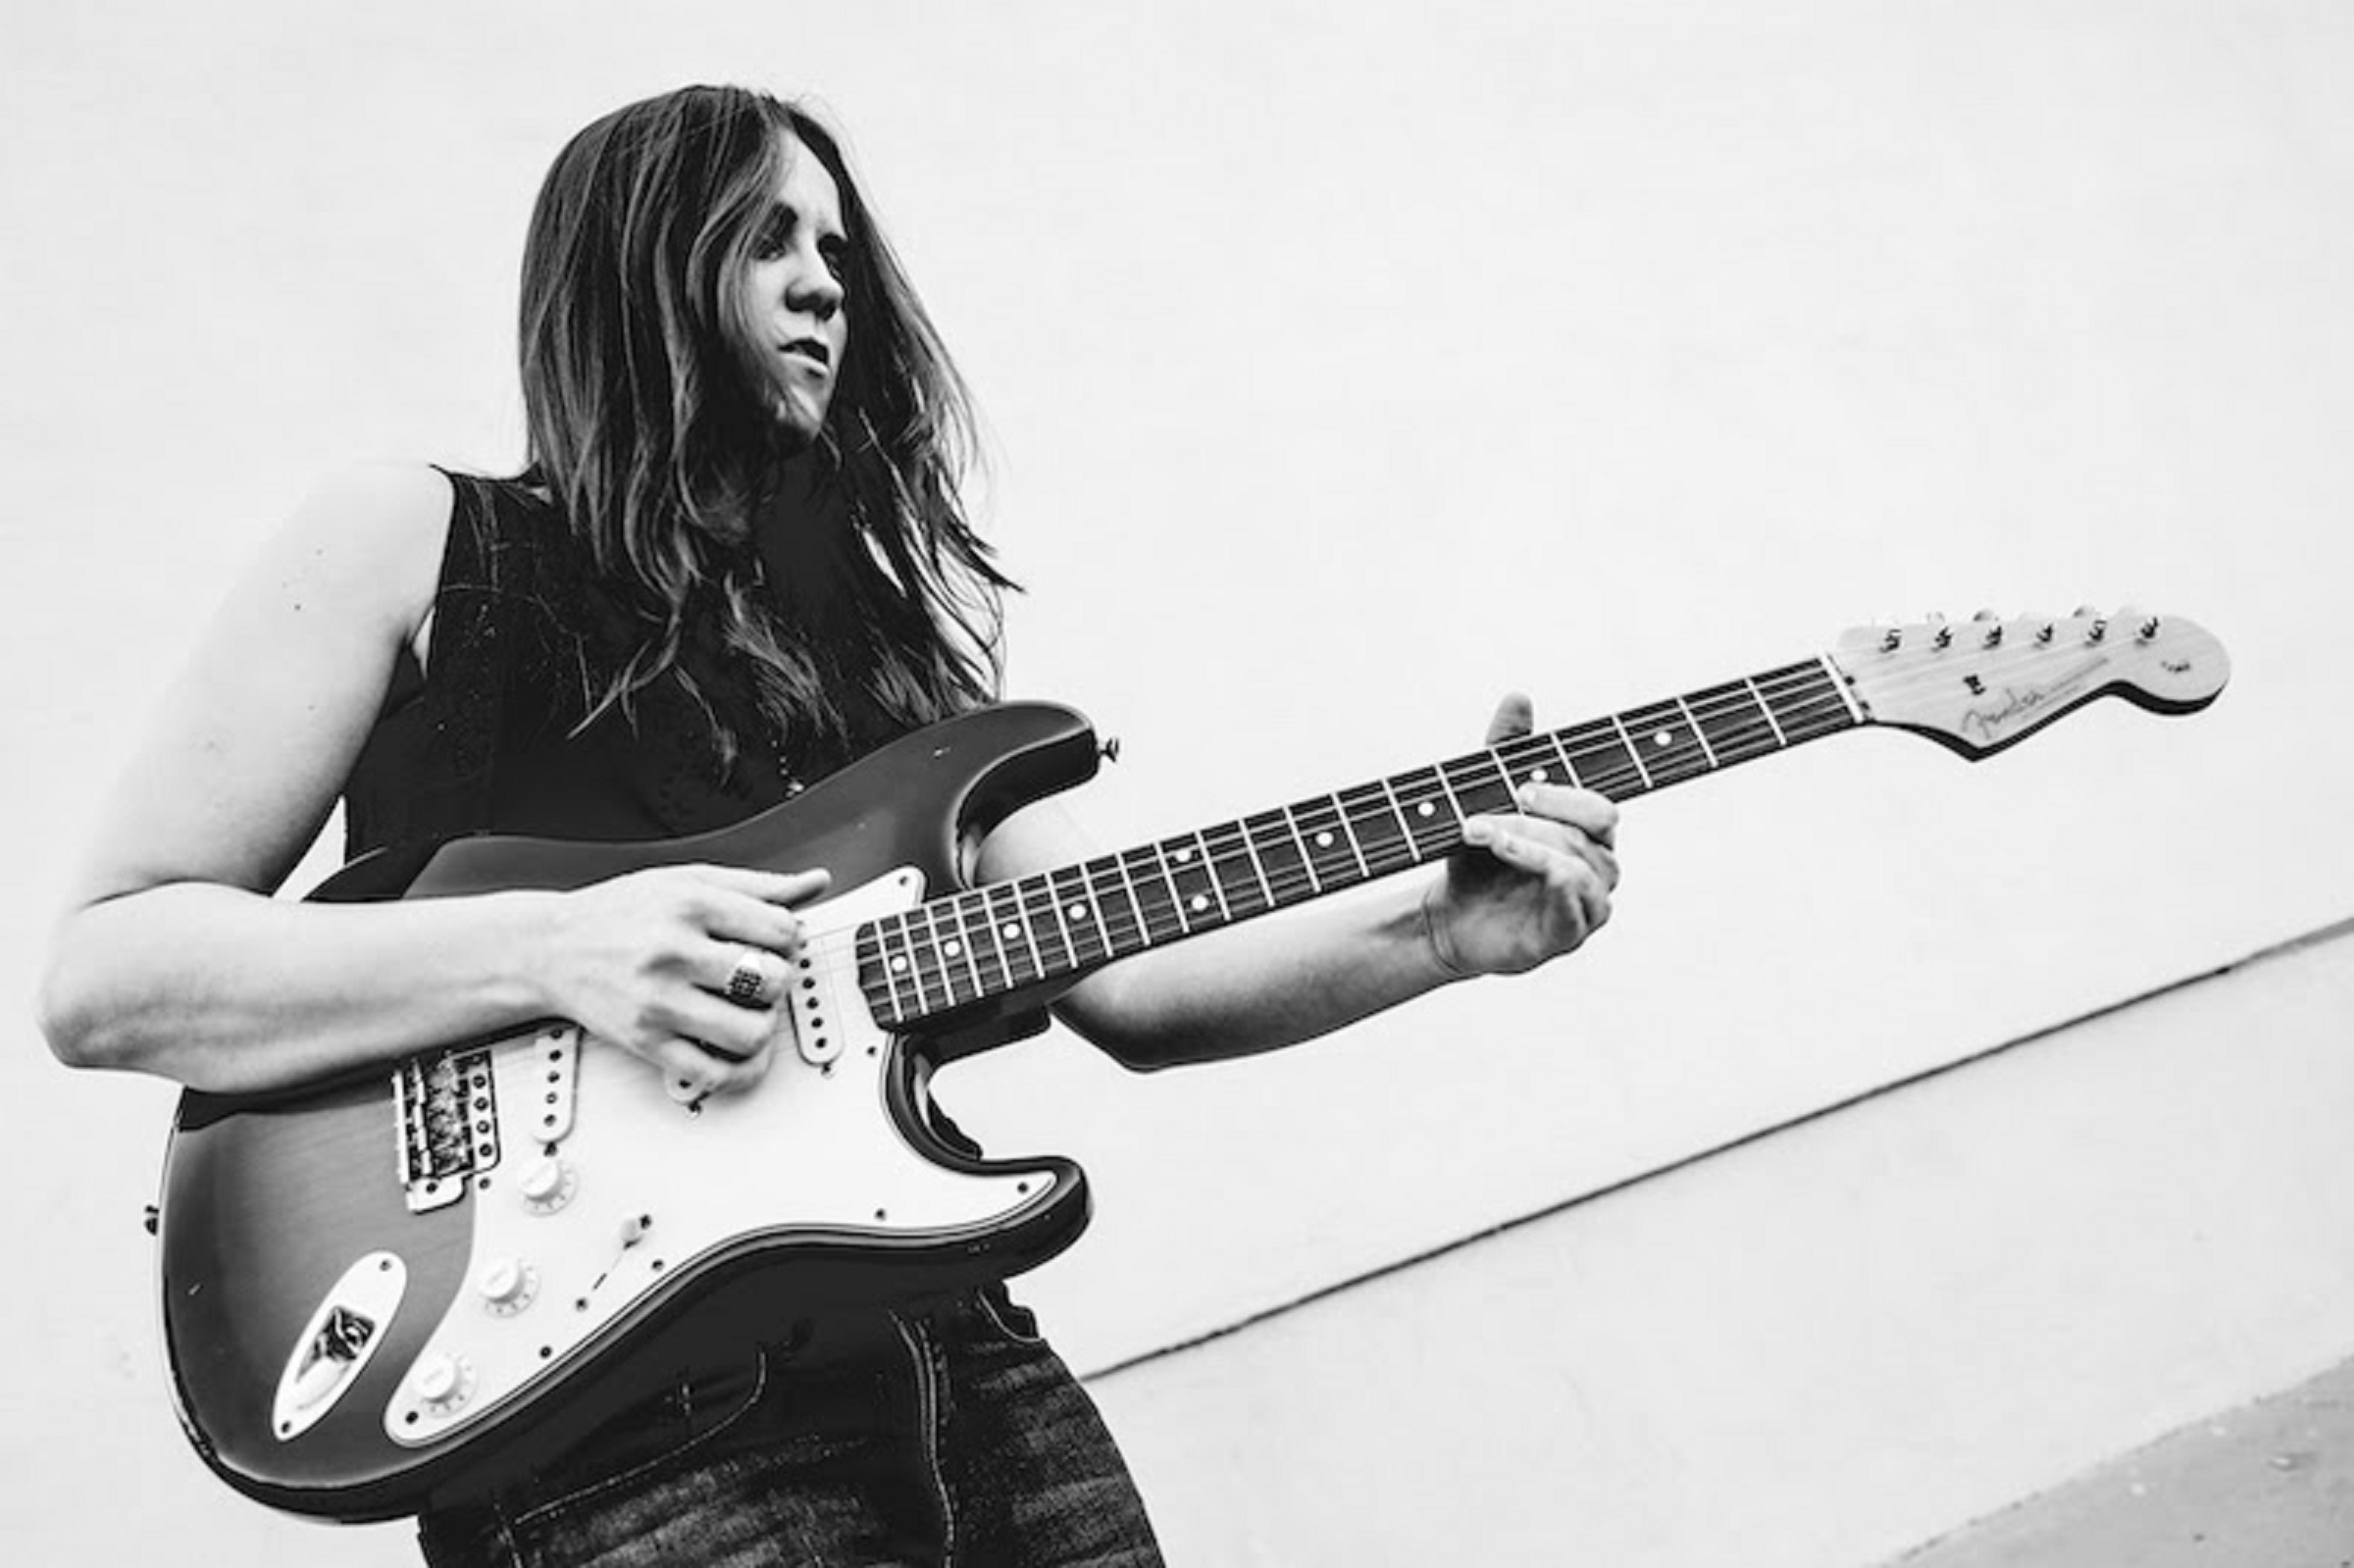 Joe Bonamassa adds Angela Petrilli to 4 of his personally curated Spotify playlists, new EP The Voices out May 5